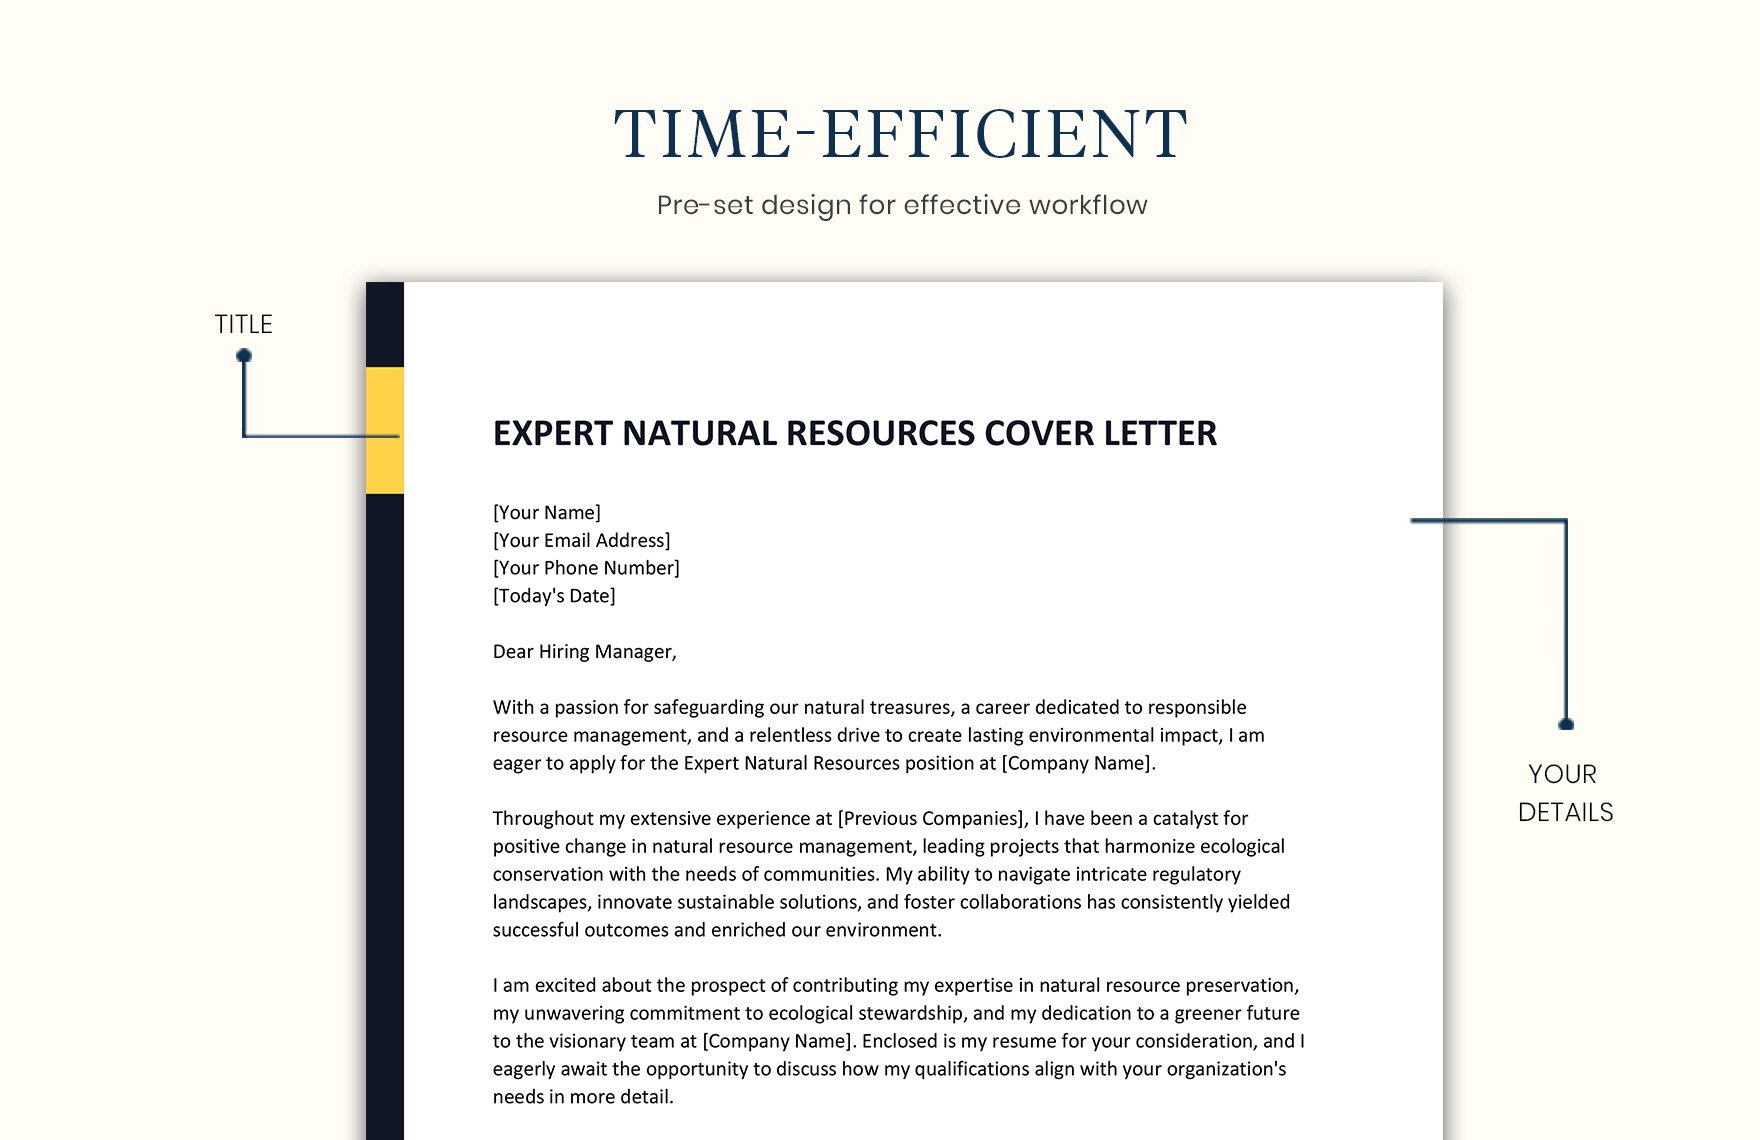 Expert Natural Resources Cover Letter